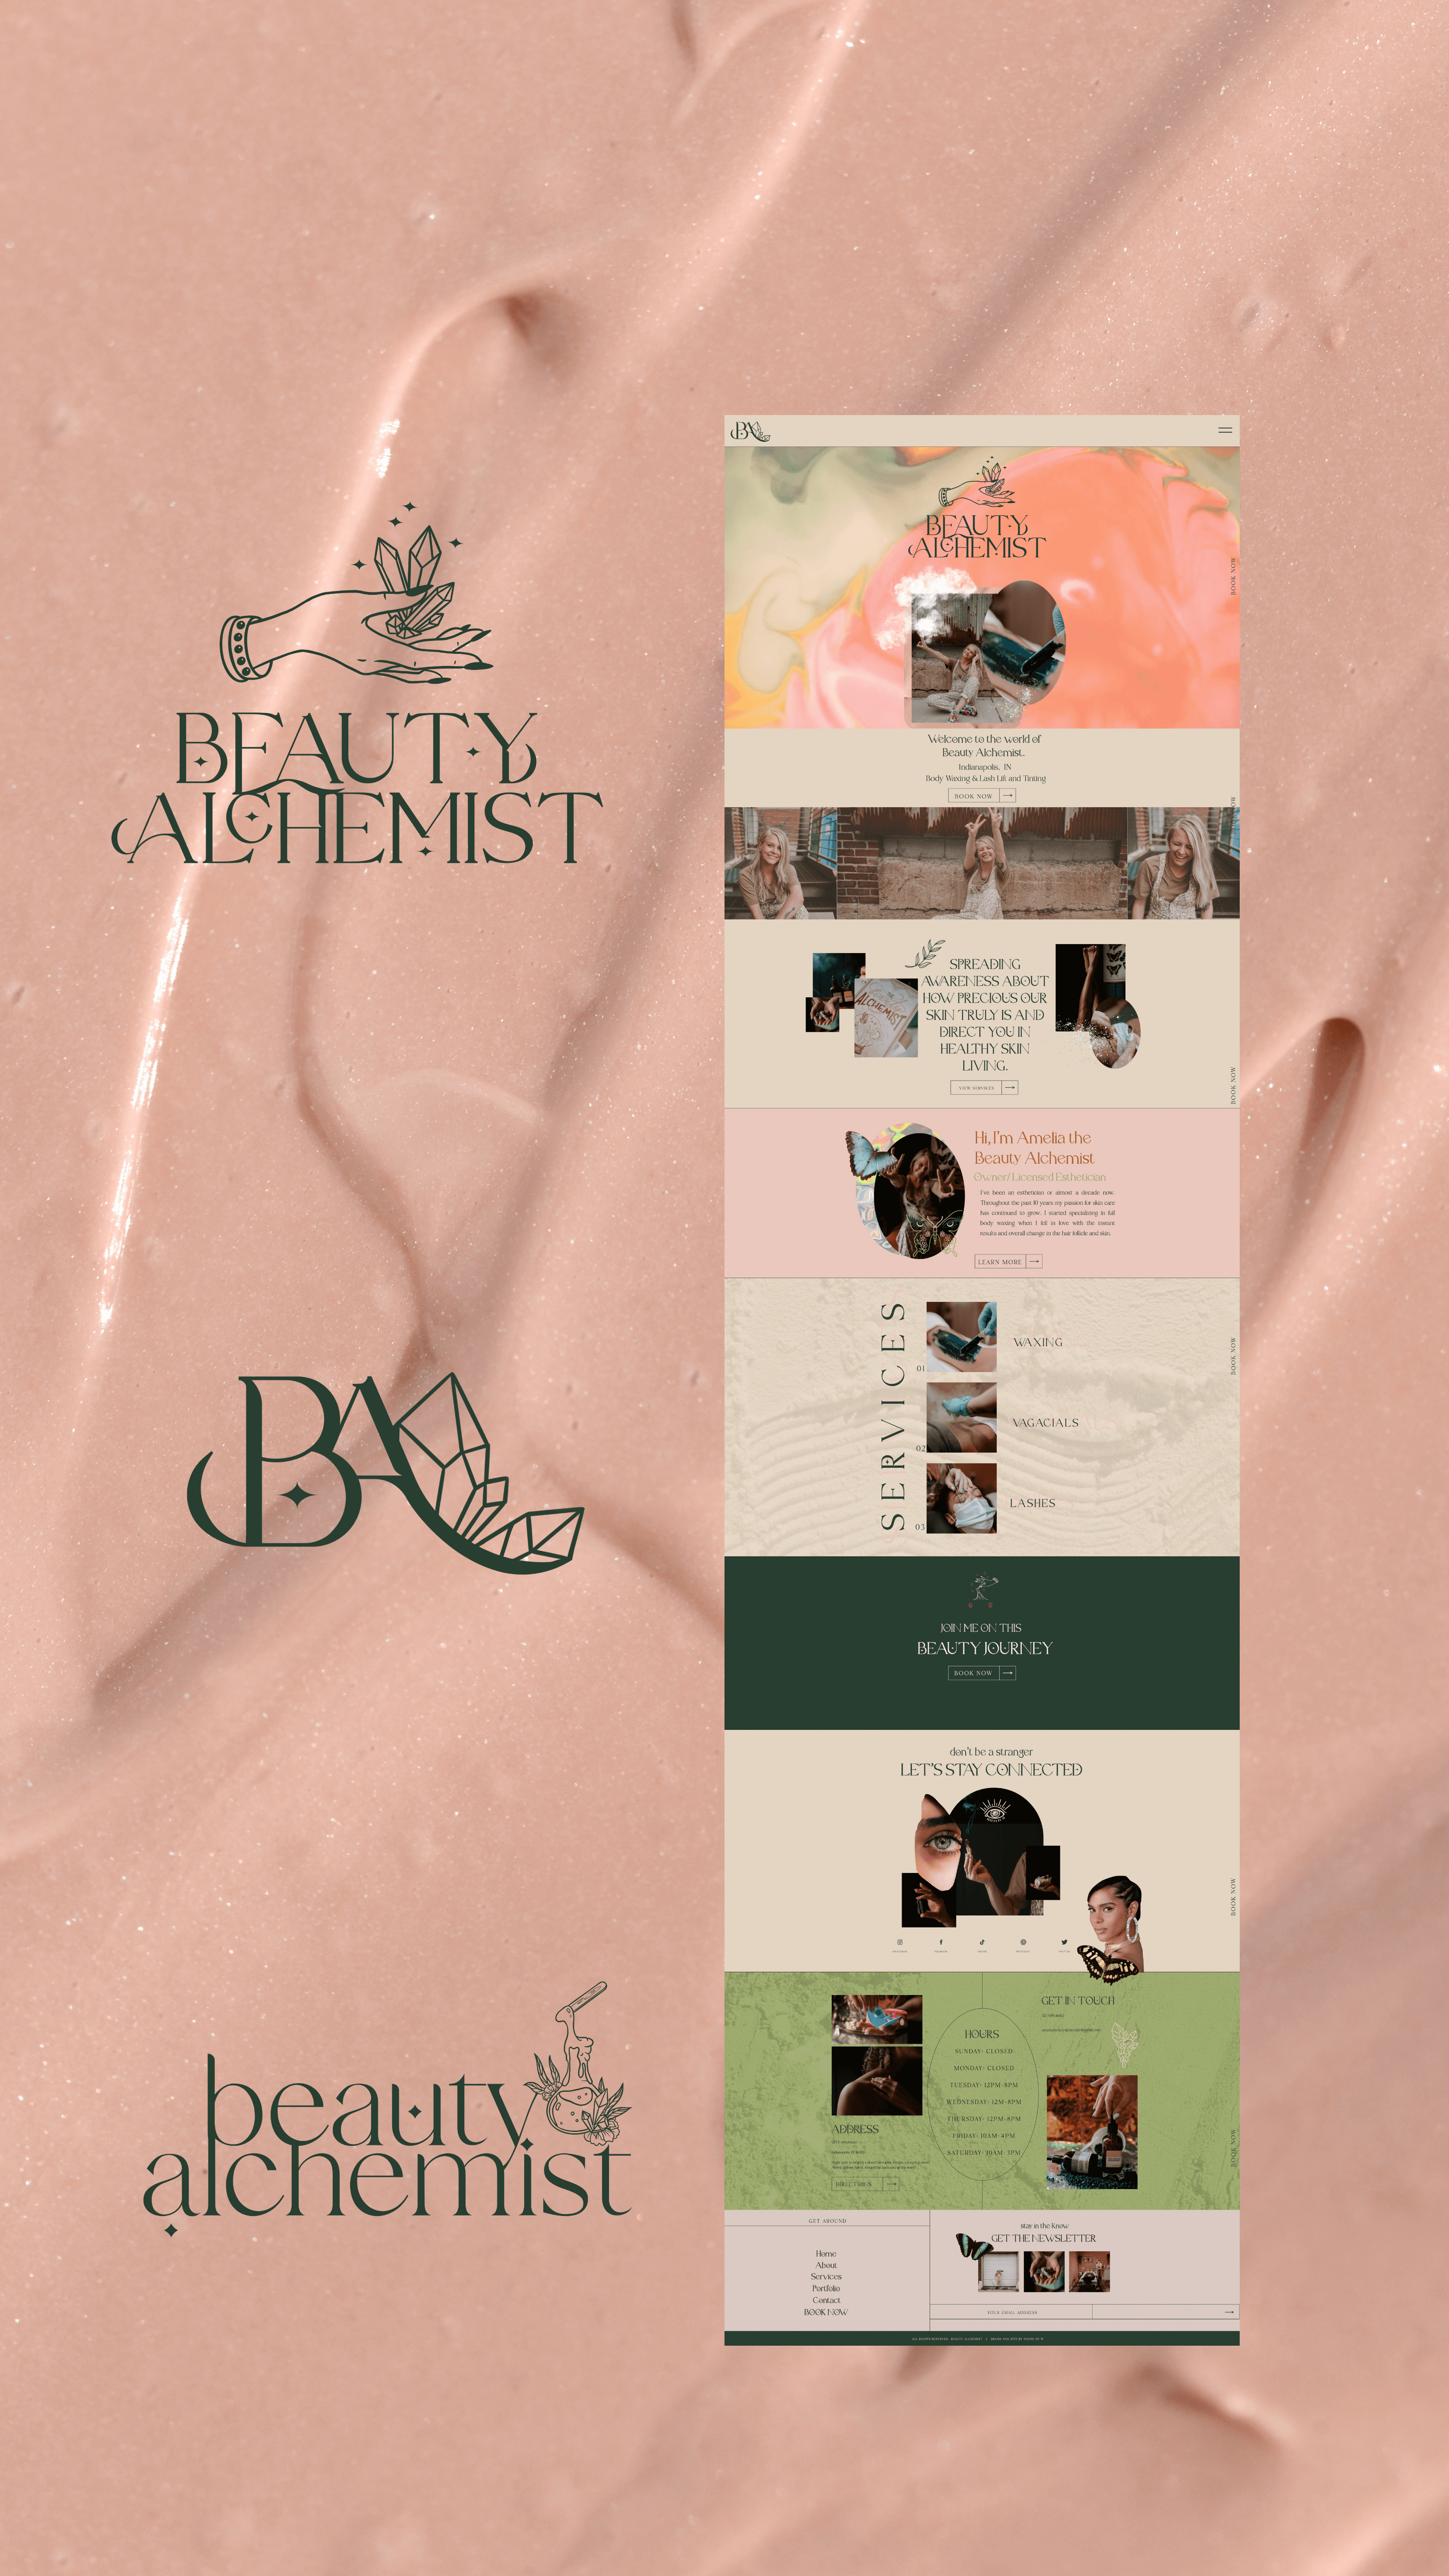 Website design for a mystical esthetician brand and web design by House of W, a brand and web designer for photographers and creatives.